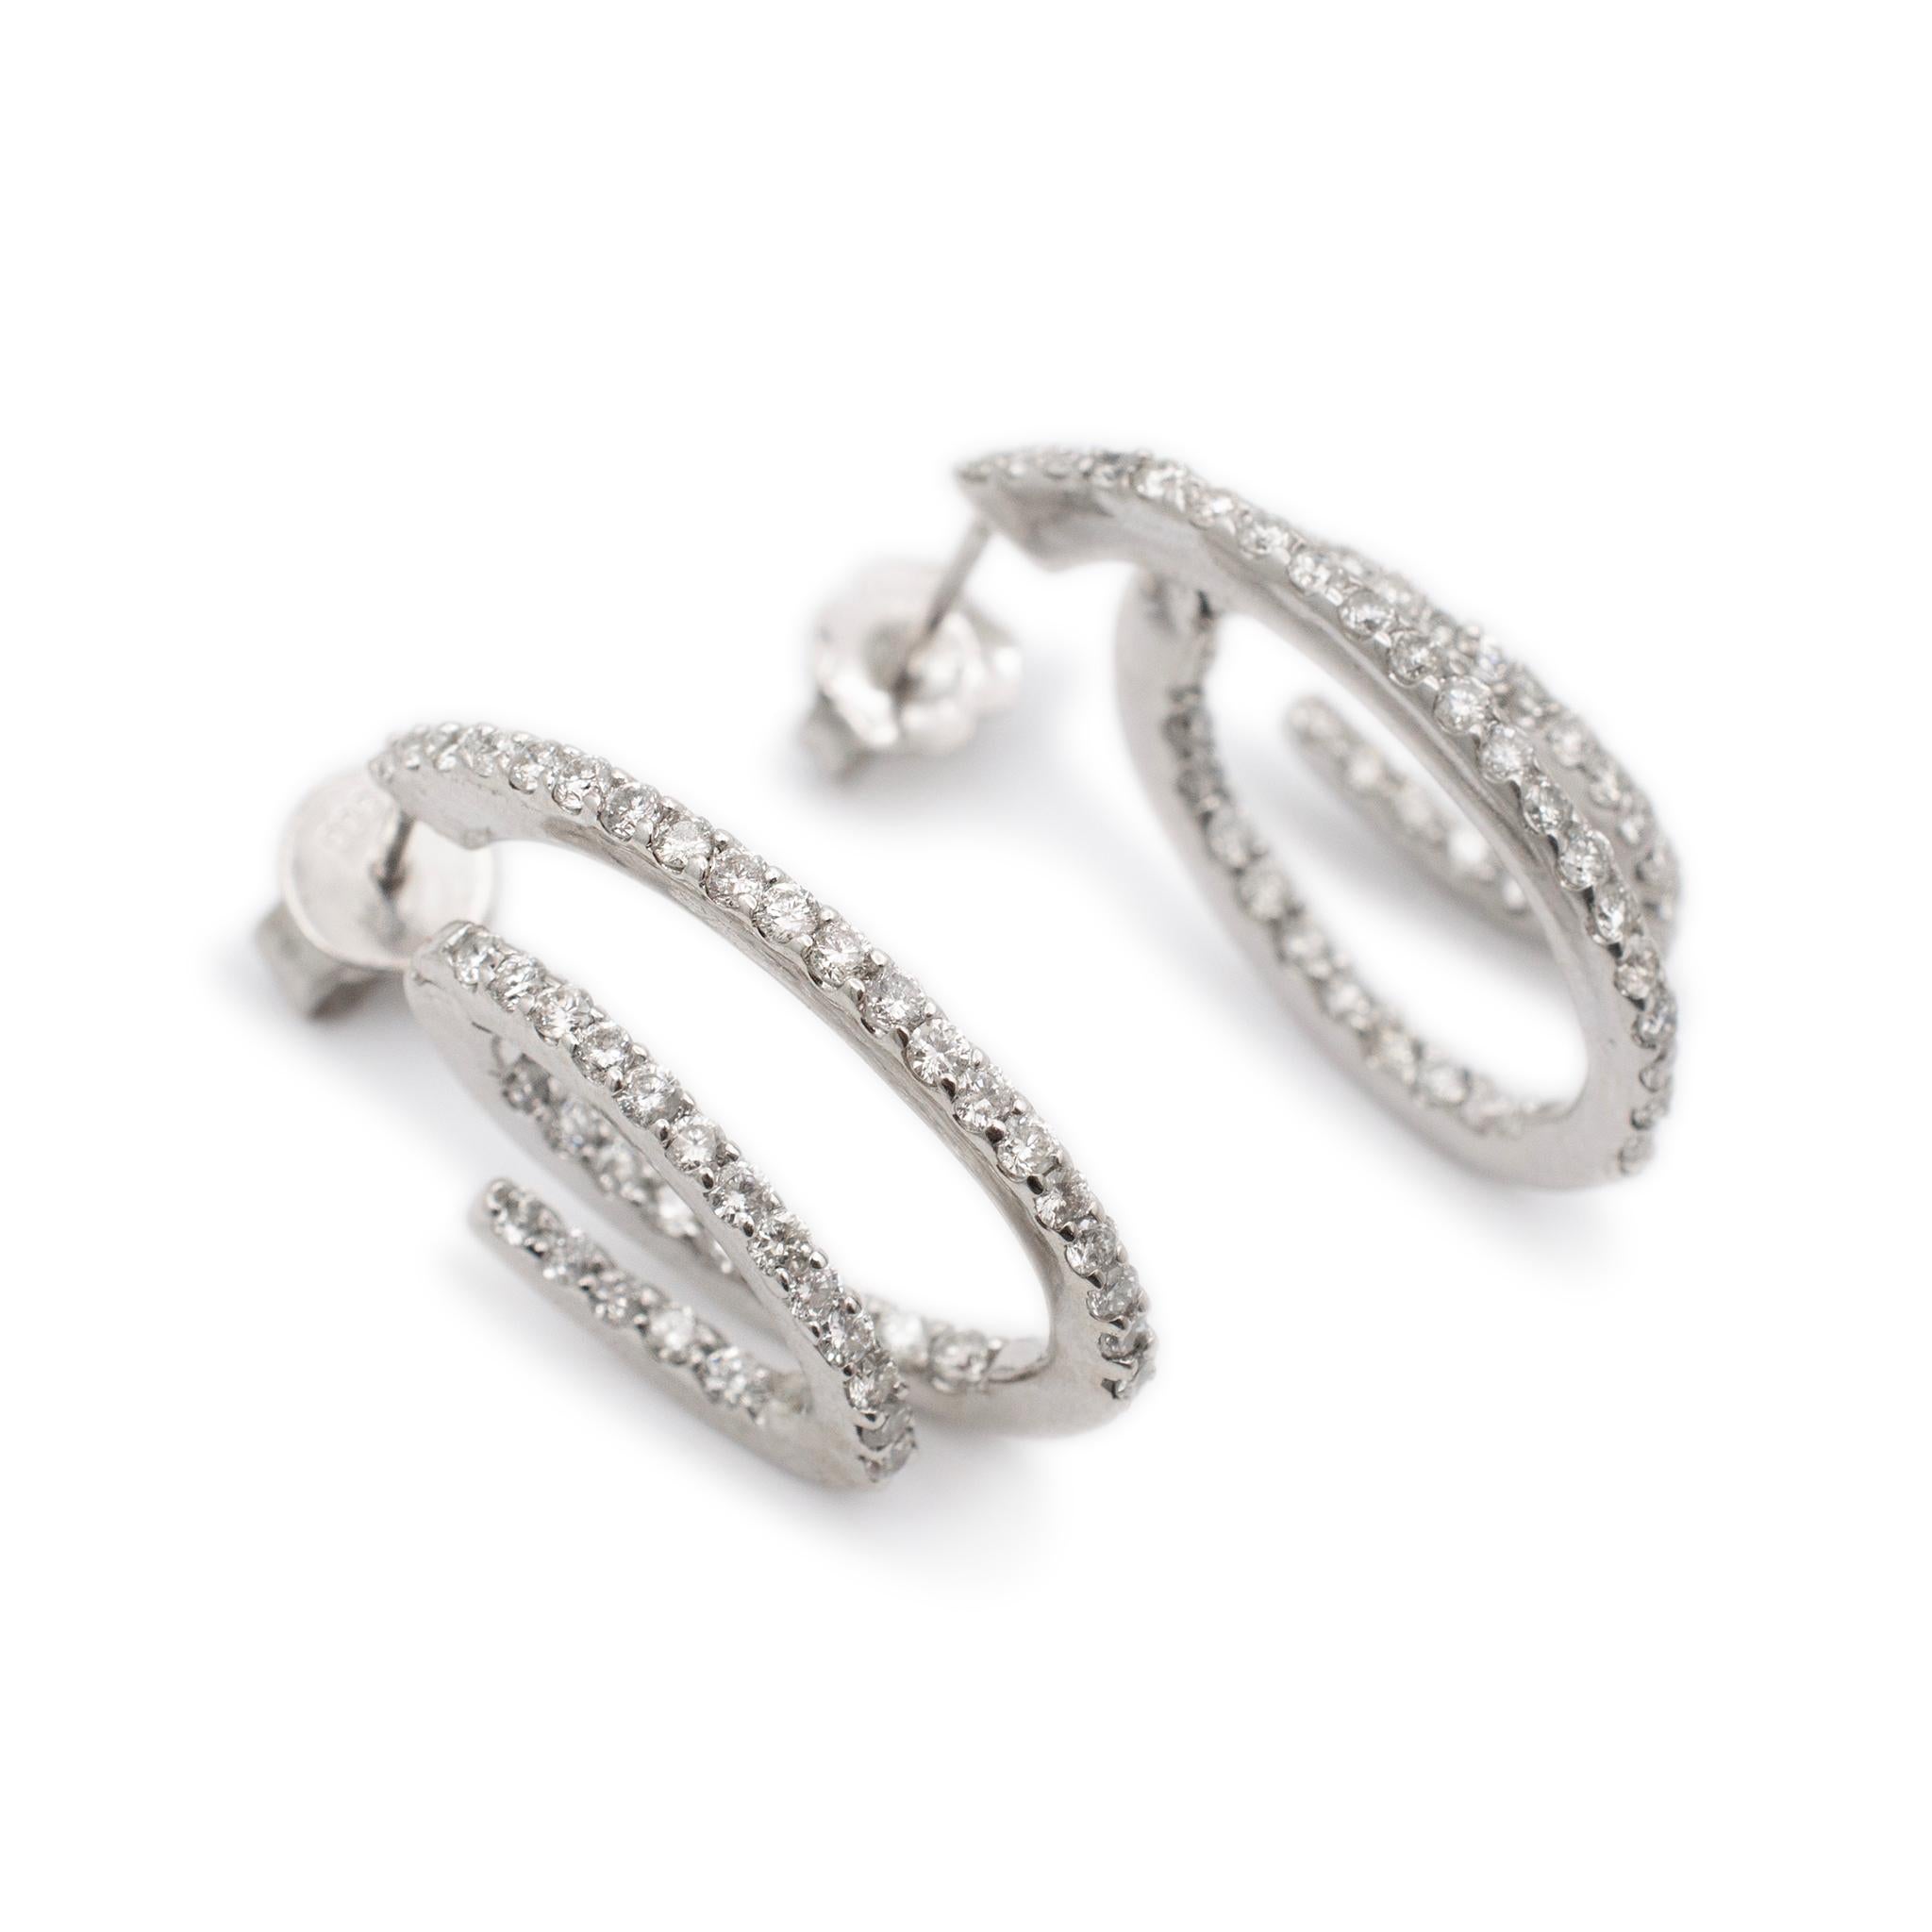 Gender: Ladies

Metal Type: 14K White Gold

Length: 1.00 inches

Width: 1.60 mm

Weight: 6.29 grams

14K White Gold diamond hoop earrings with push backs. Engraved with 